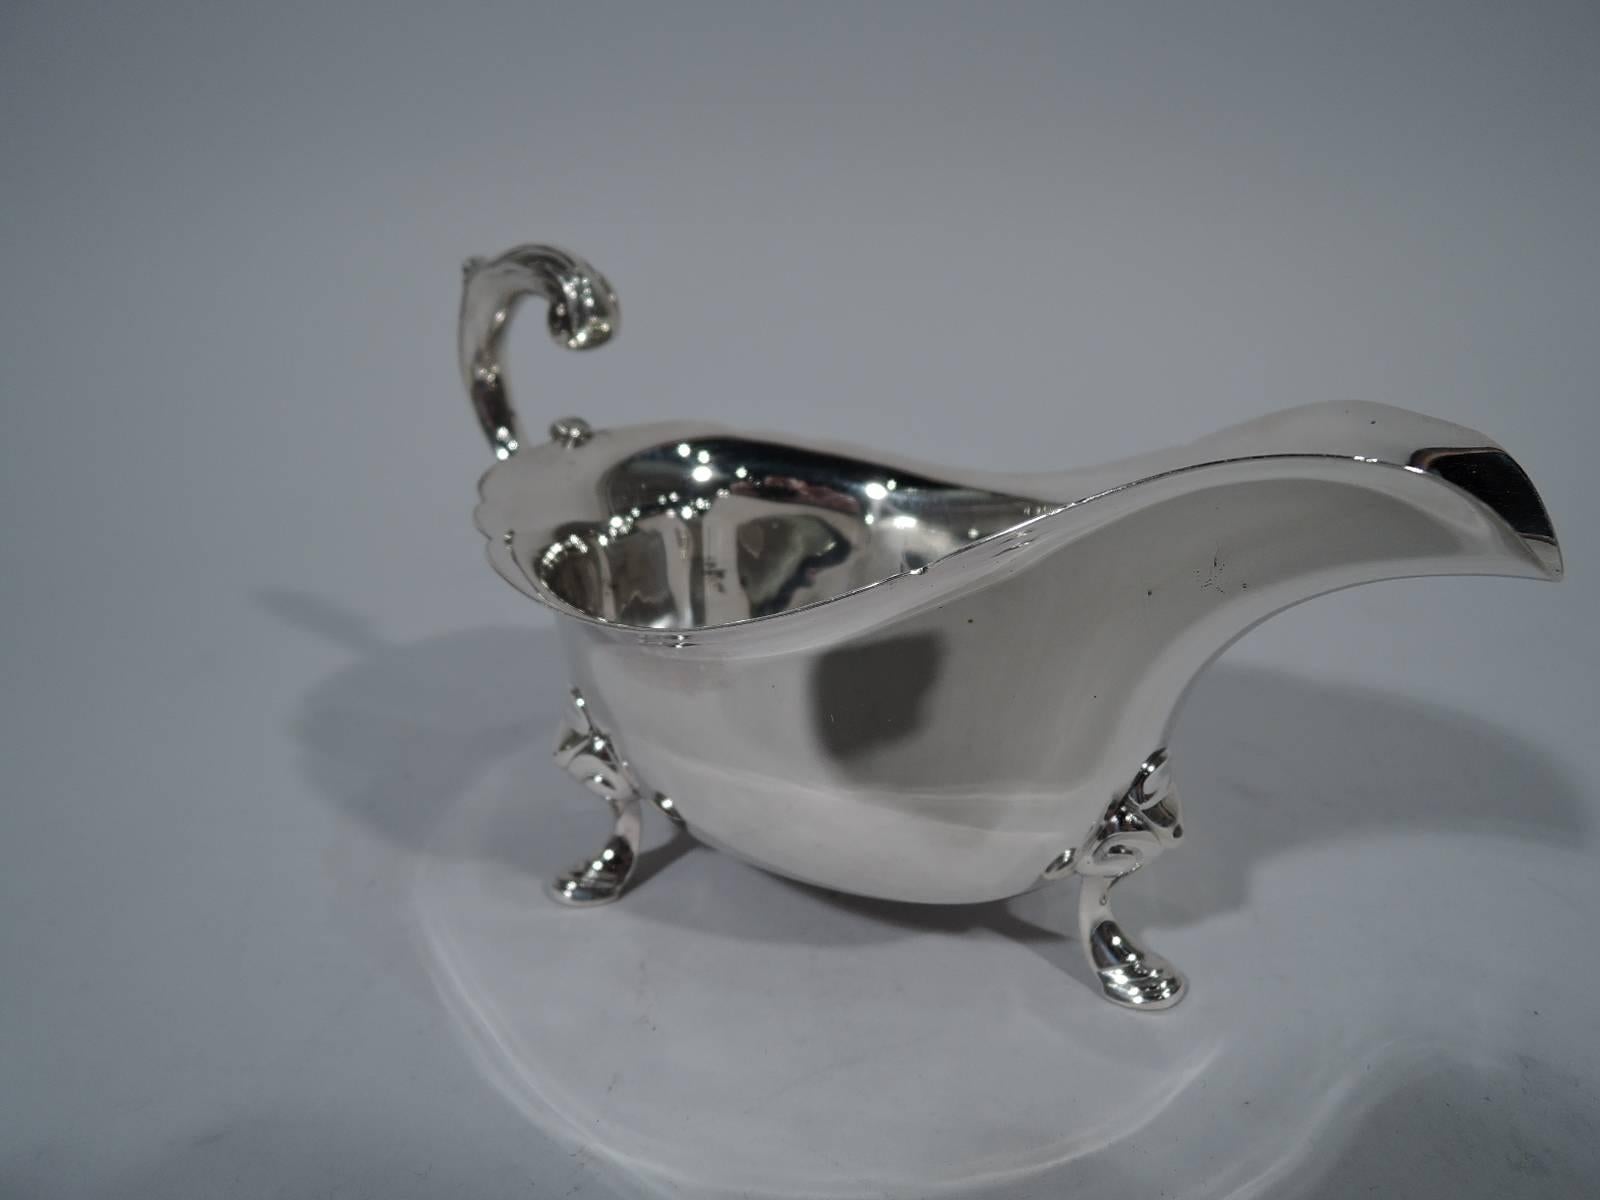 Wartime sterling silver gravy boat in Georgian style. Made by Tiffany & Co. in New York. Helmet mouth with scalloped rim and leaf-capped flying double-scroll handle. Rests on three hoofs with volute scroll mounts. A nice traditional piece made in a